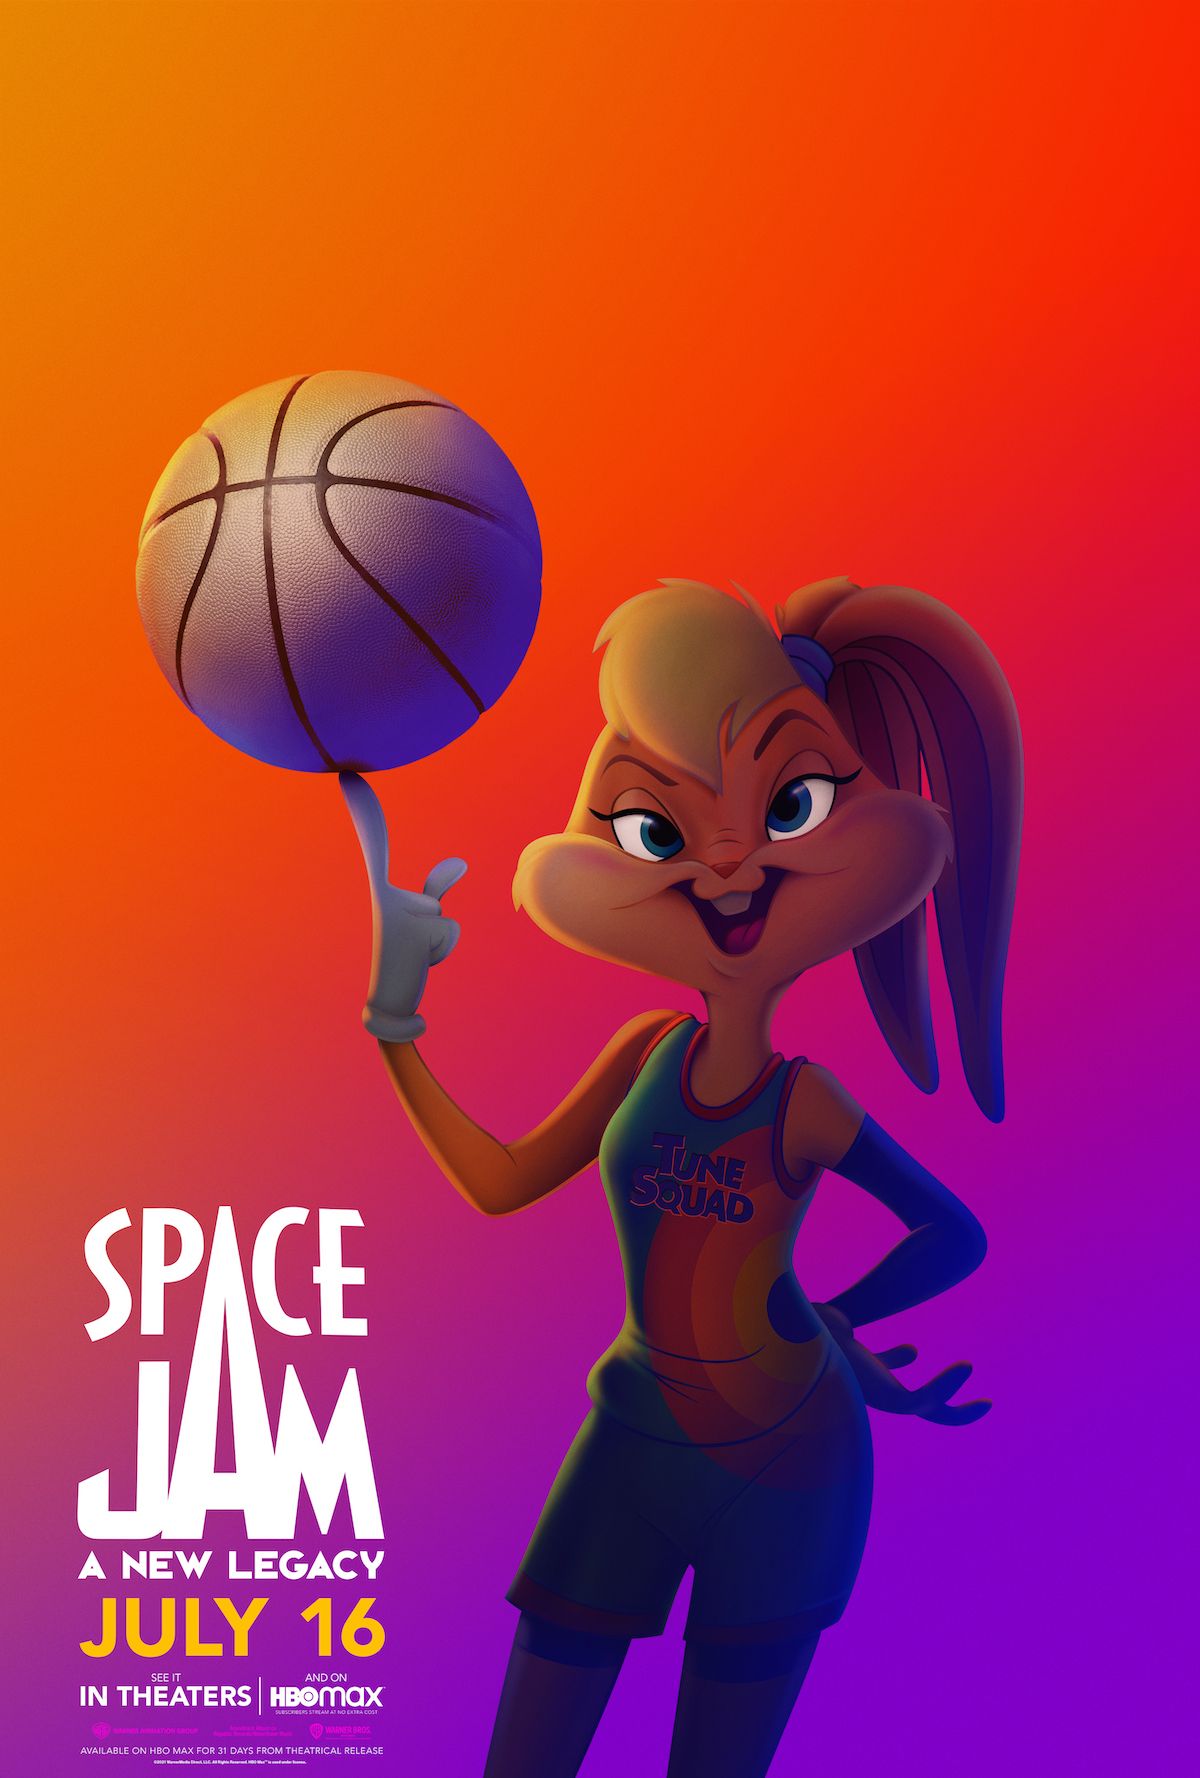 Lola Bunny Space Jam 2: A New Legacy character poster